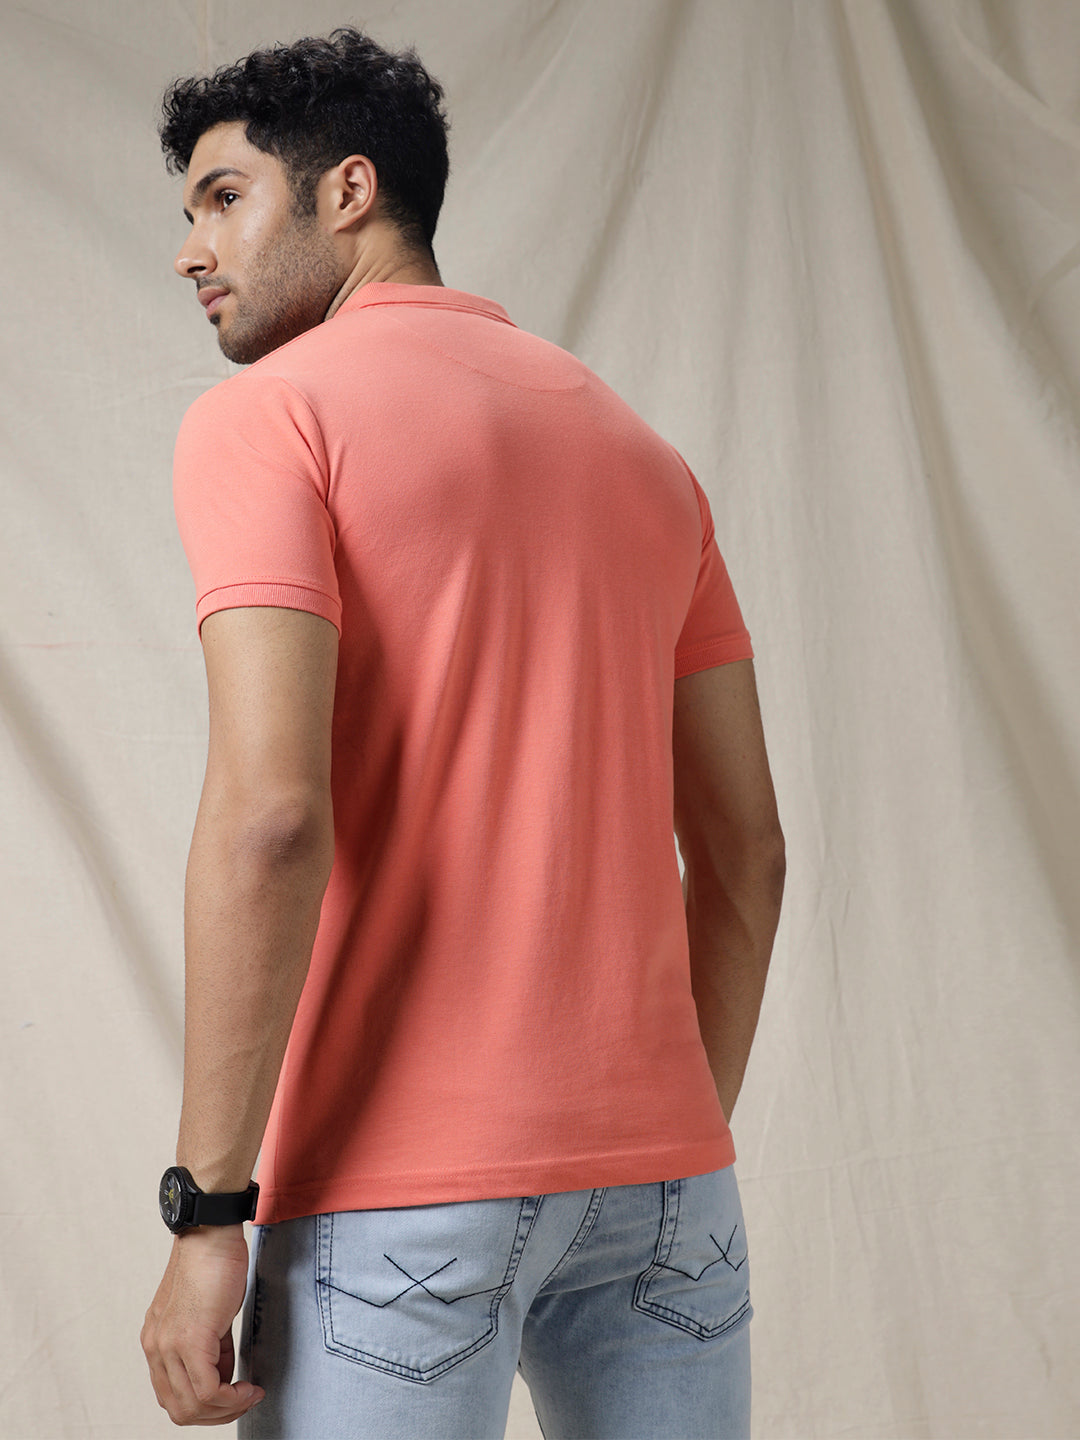 Casual Solid Pink Polo